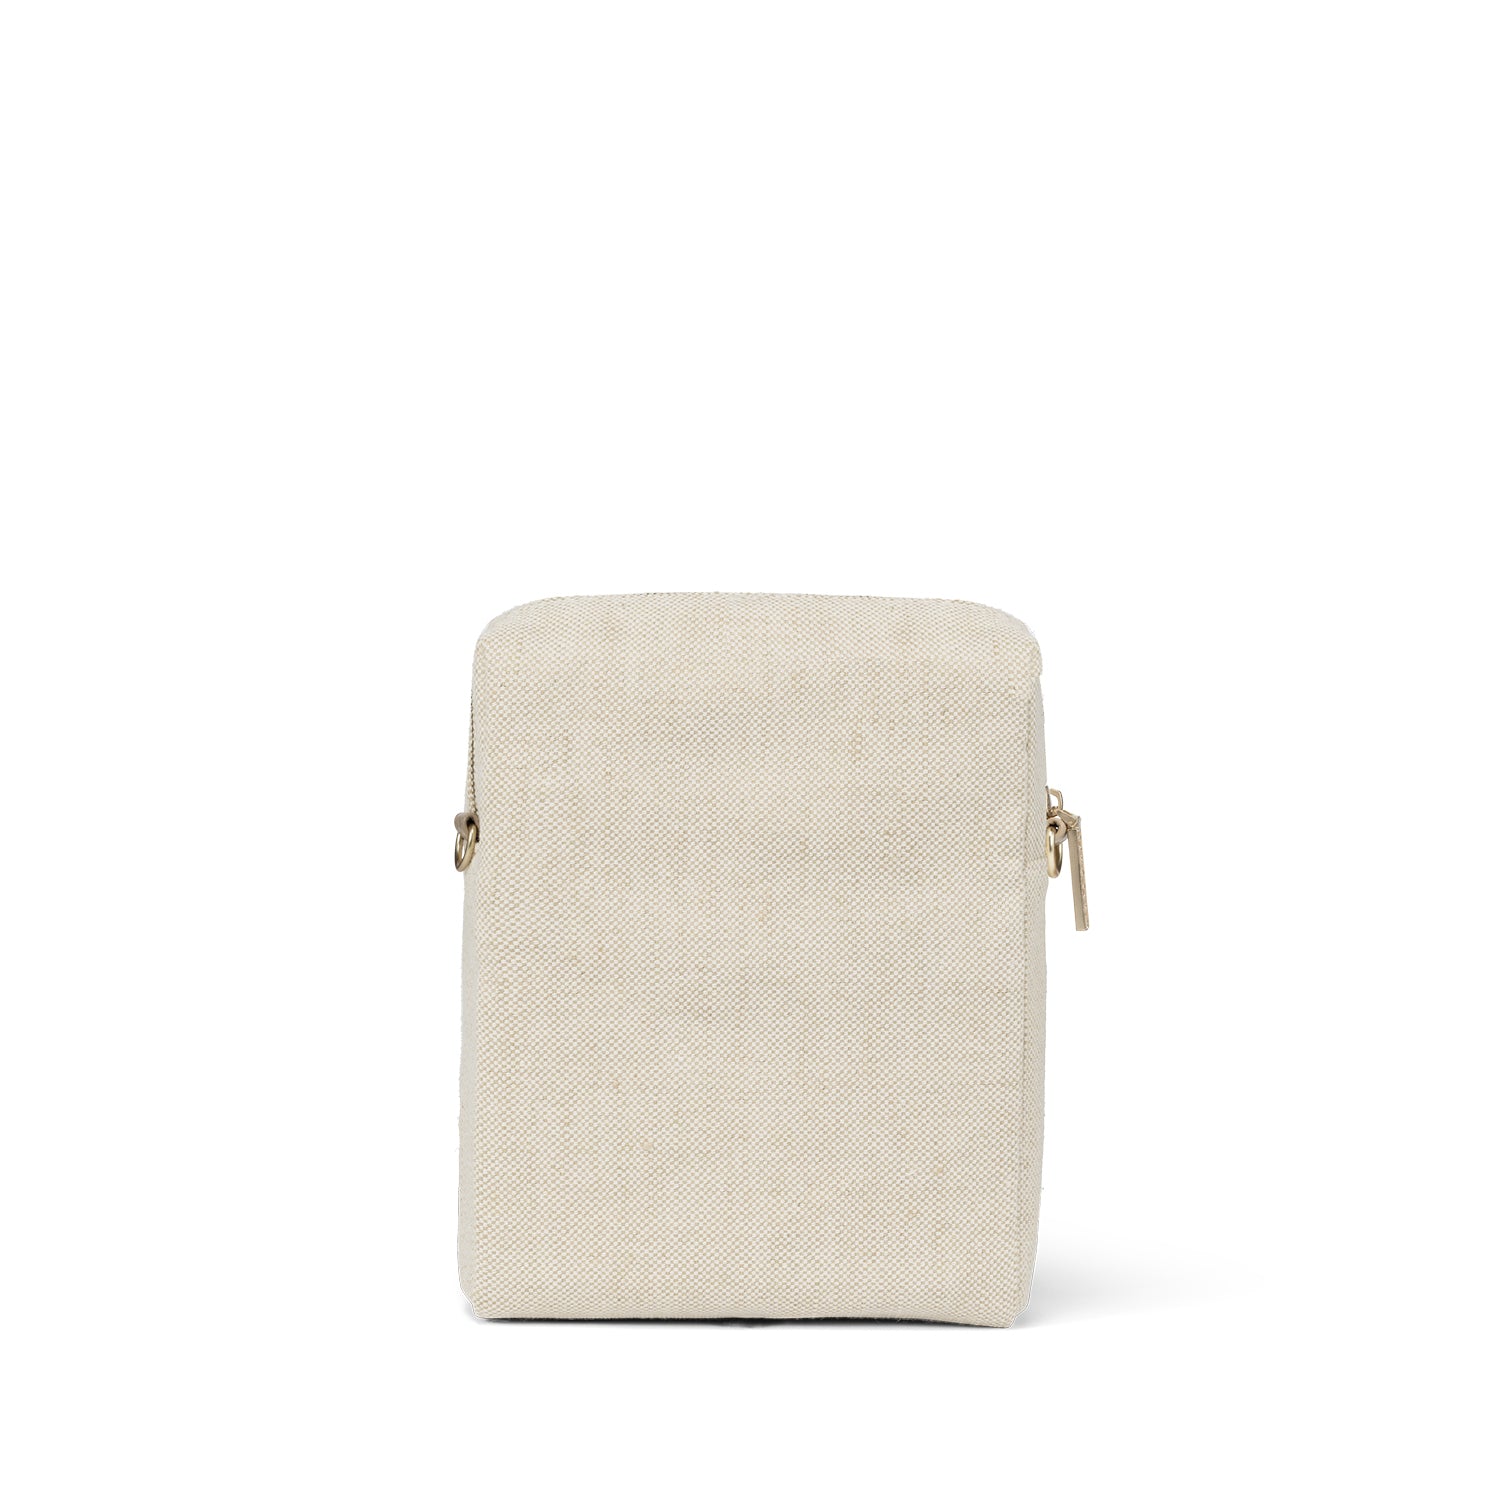 Fusion - Raw Cotton - Upright Toiletry Bag